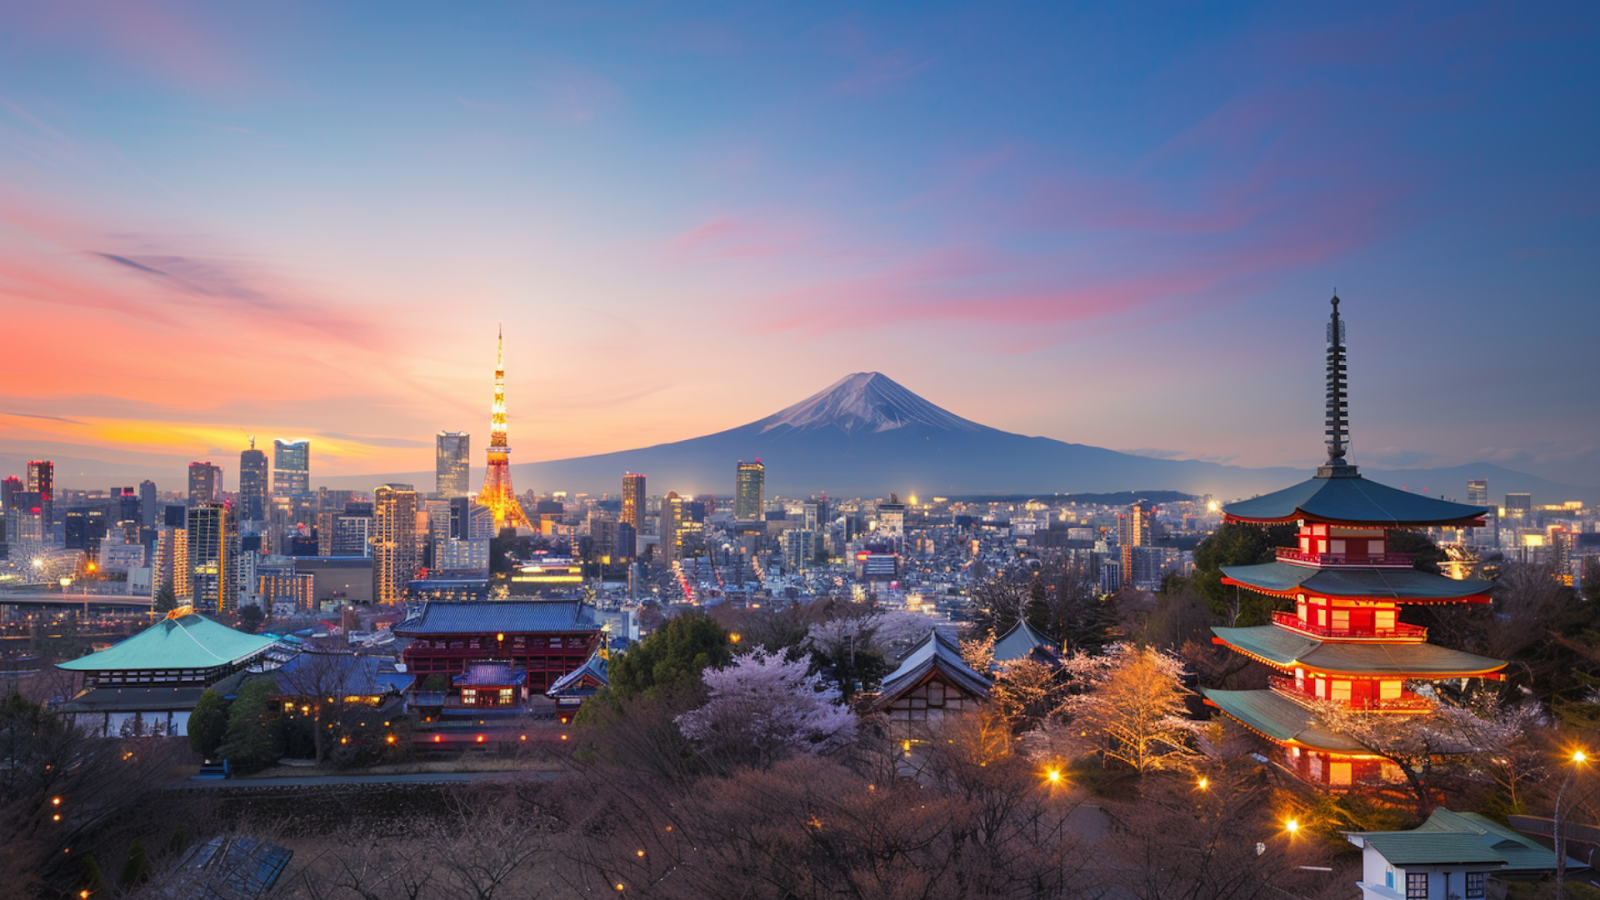 Houses and buildings in Tokyo, Japan with Mount Fuji as the backdrop